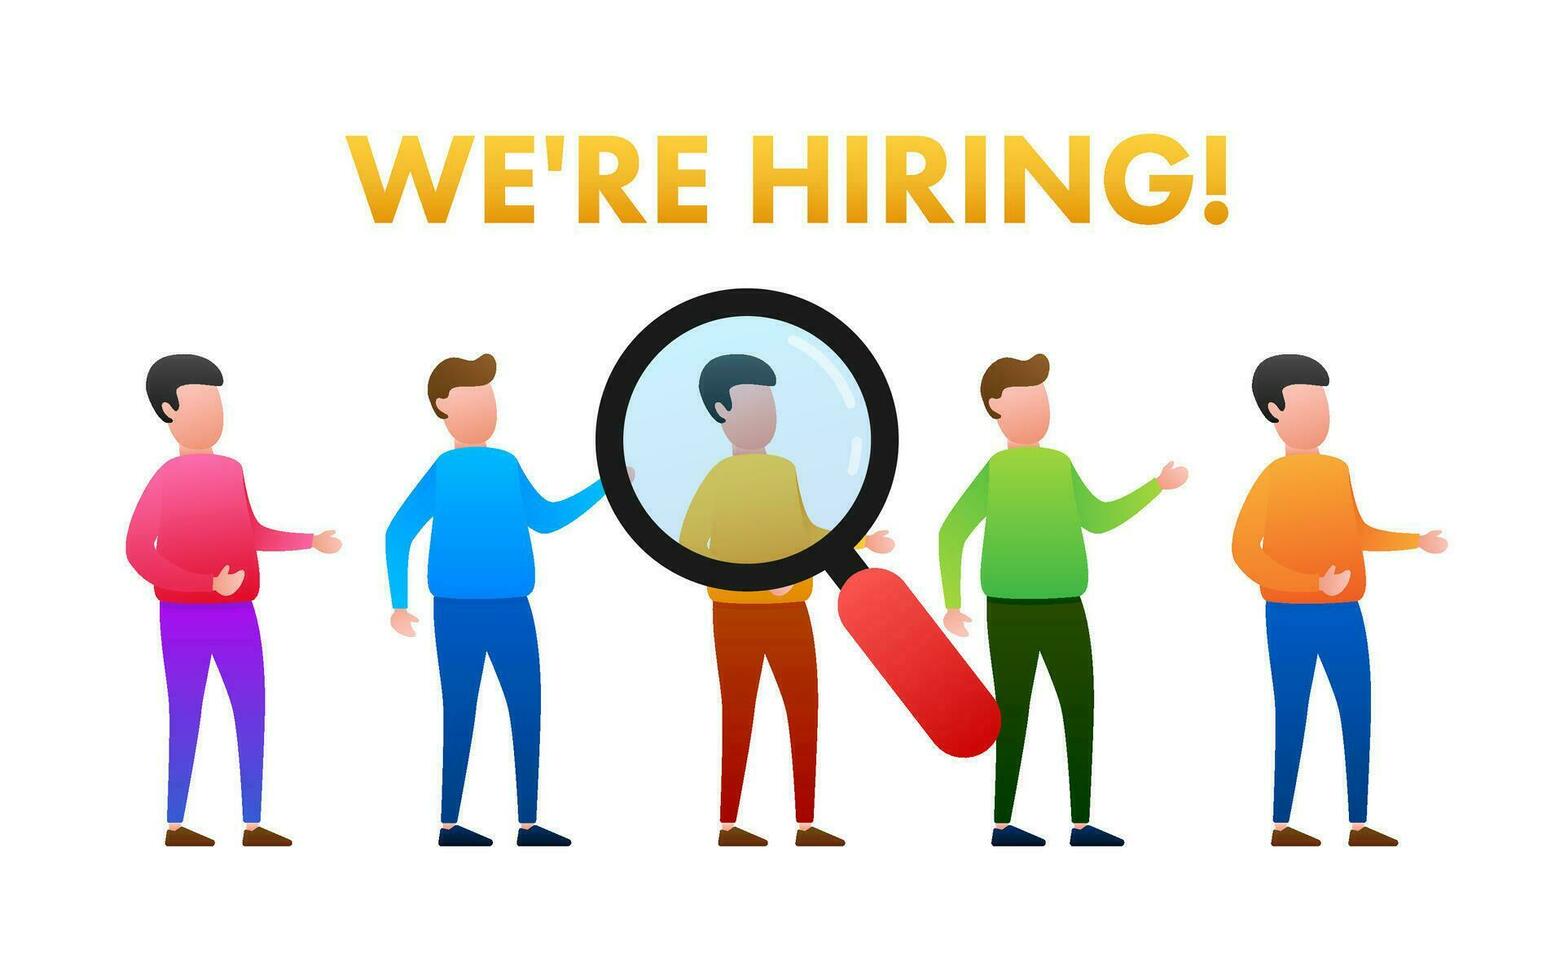 We are hiring flat cartoon illustration. Recruitment concept. Hire workers, choice employers search team for job. Resume icon. Vector illustration